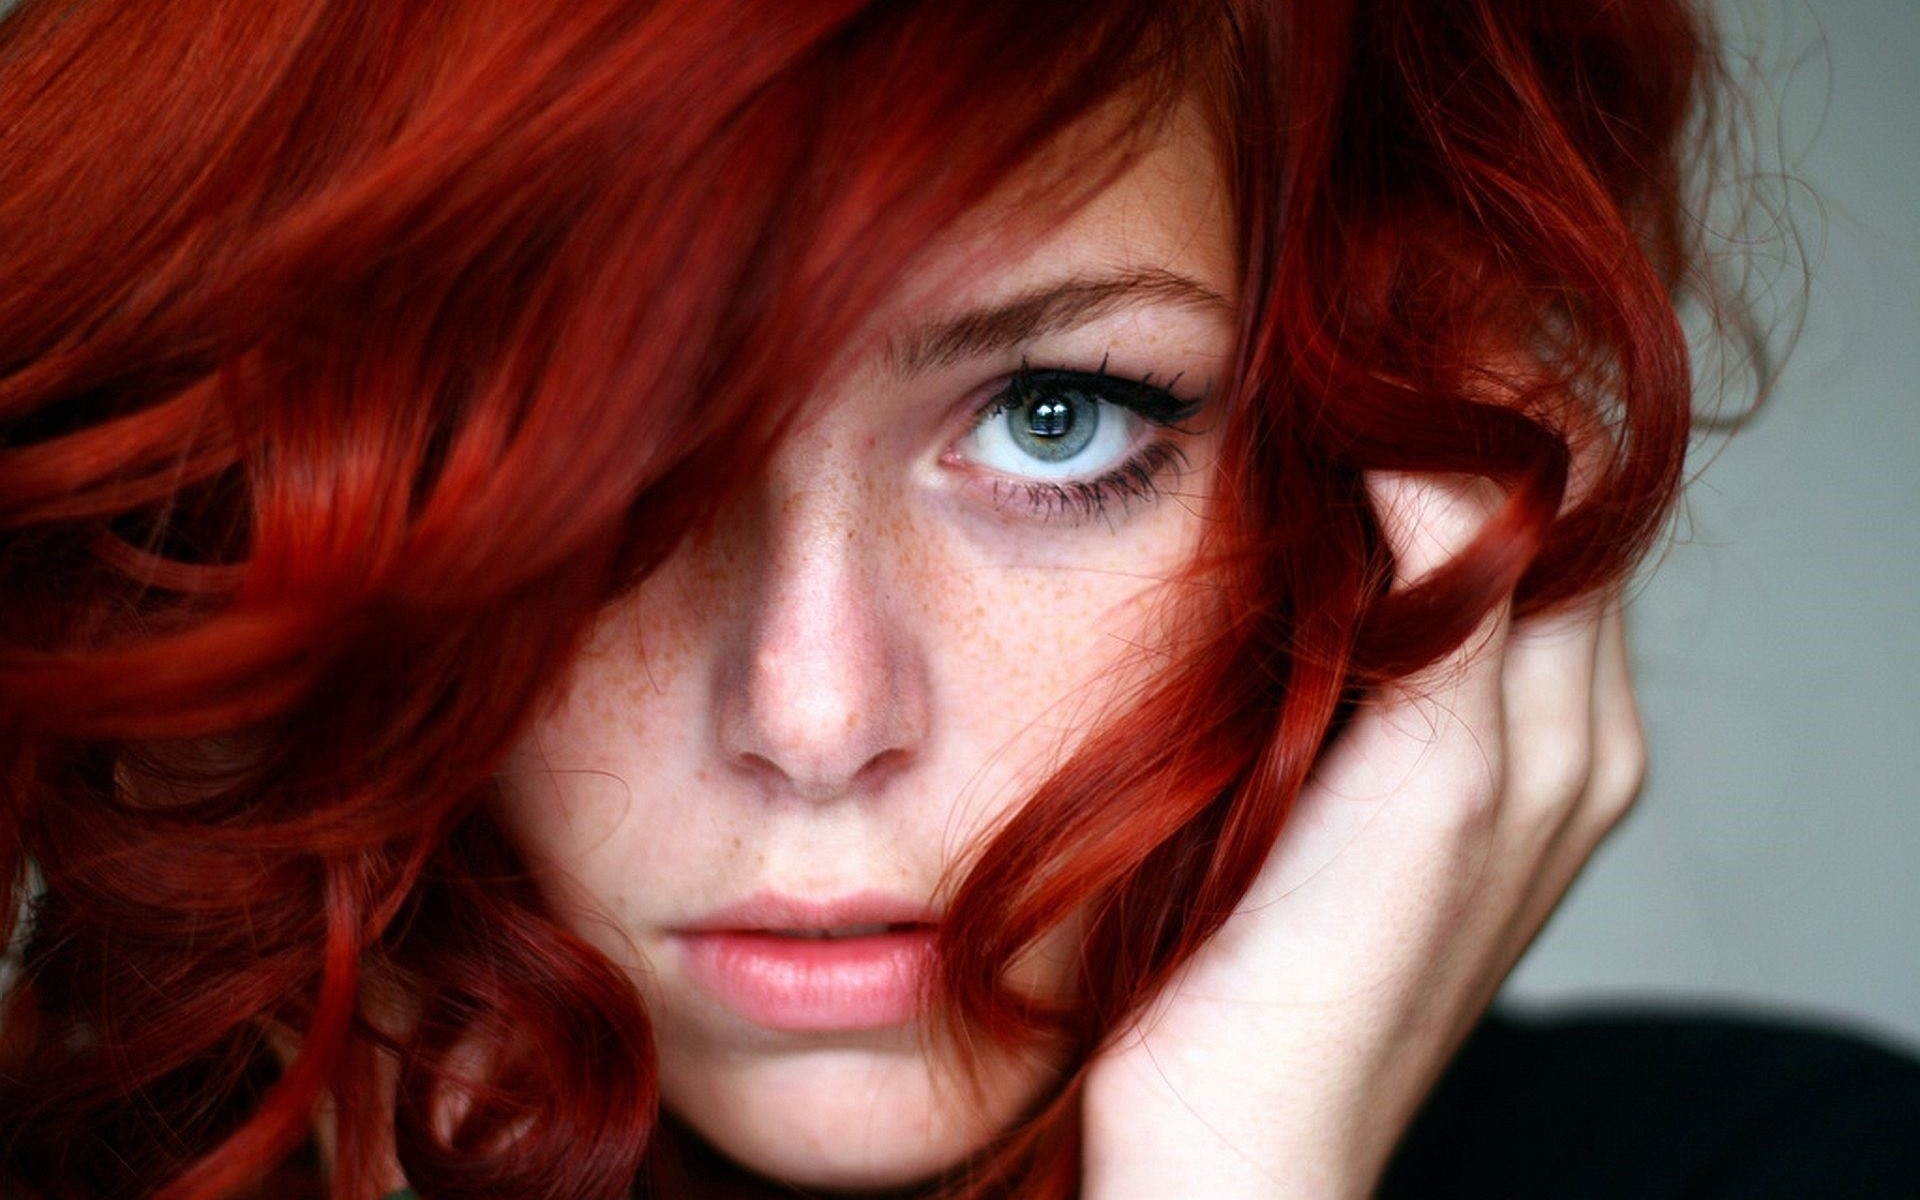 3. Stunning redhead with blue eyes named Courtney - wide 9